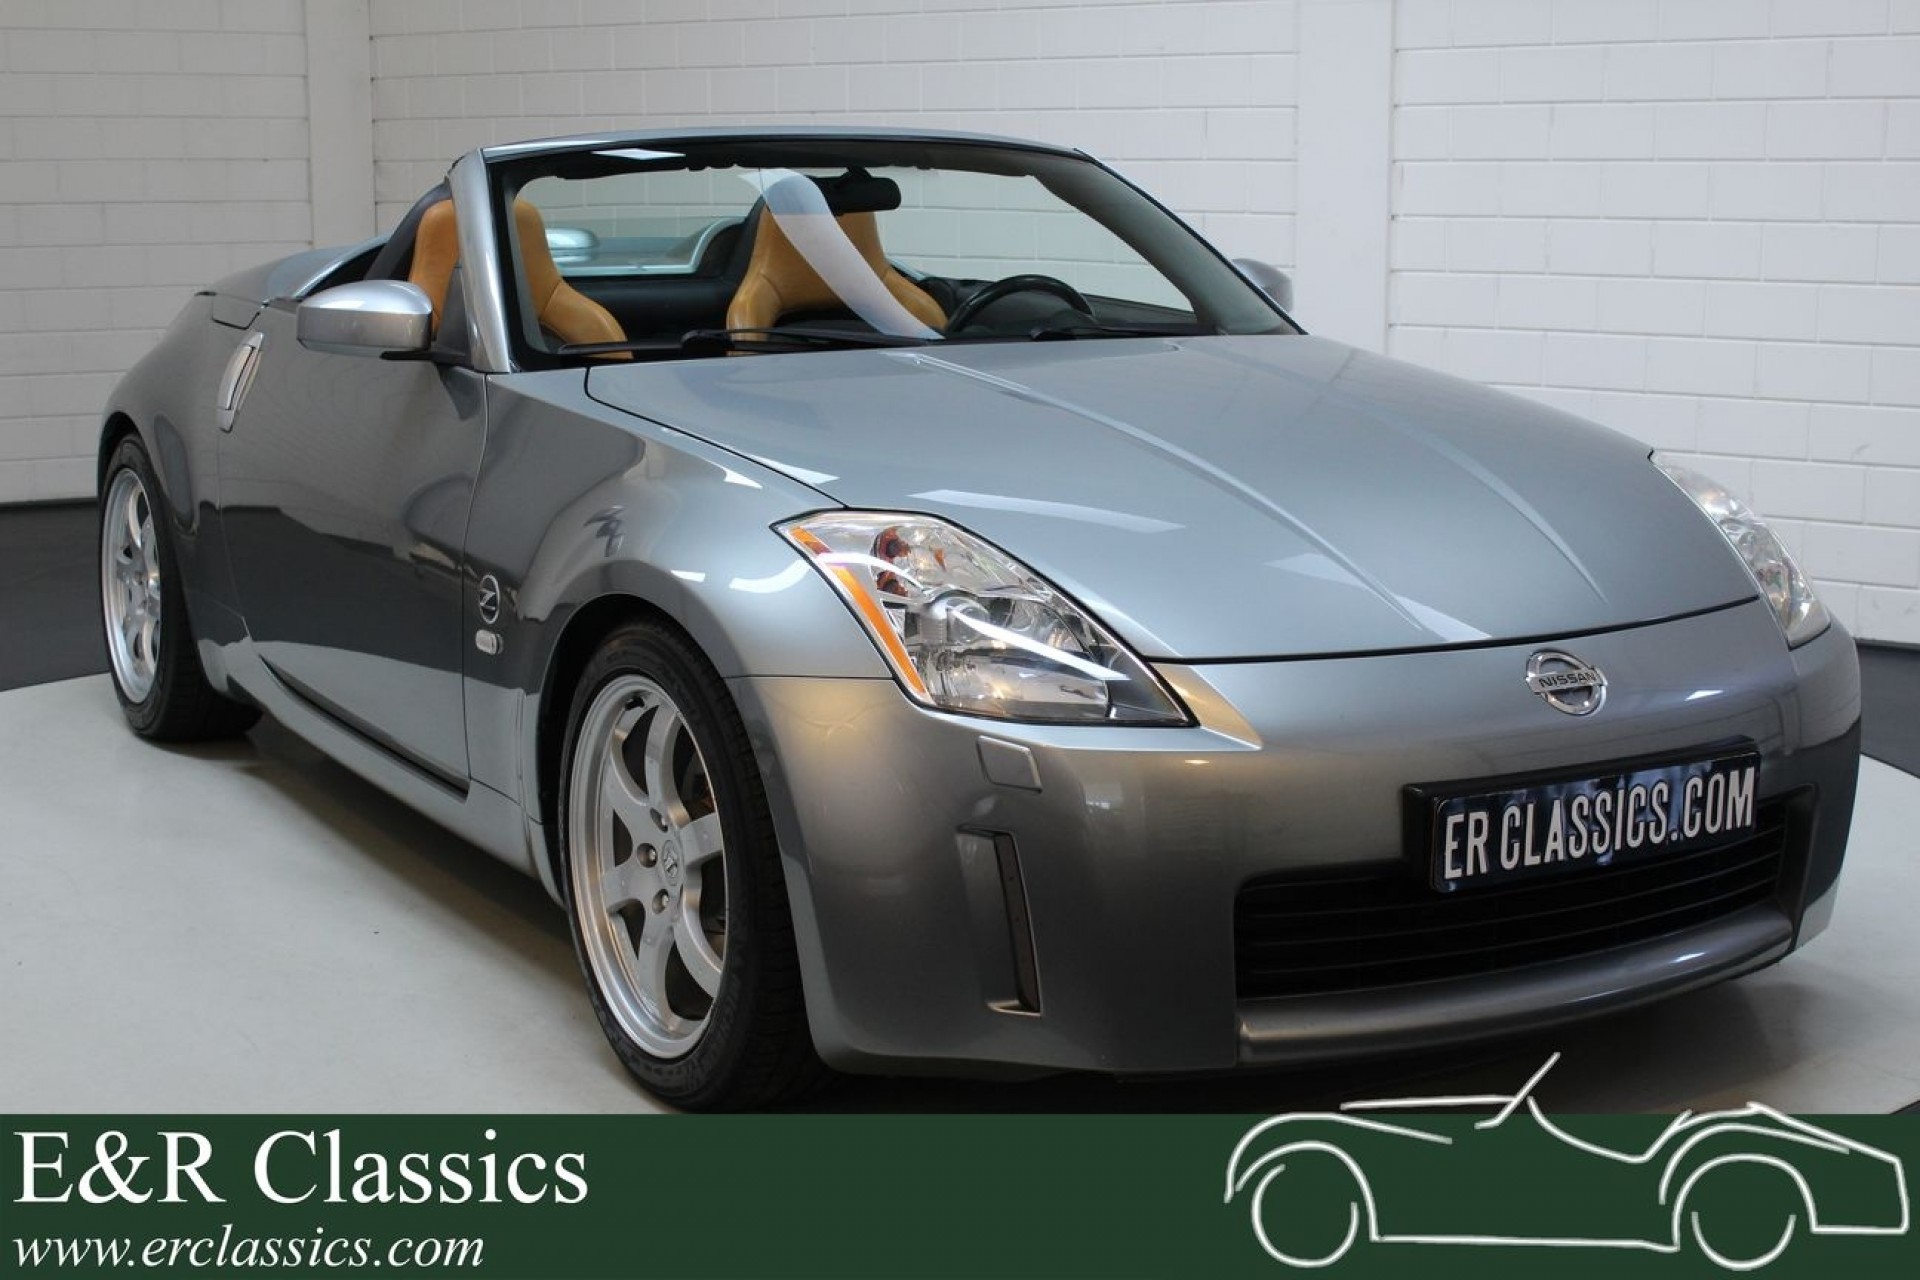 Nissan 350z Cabriolet 2005 New Soft Top For Sale At Erclassics [ 1280 x 1920 Pixel ]